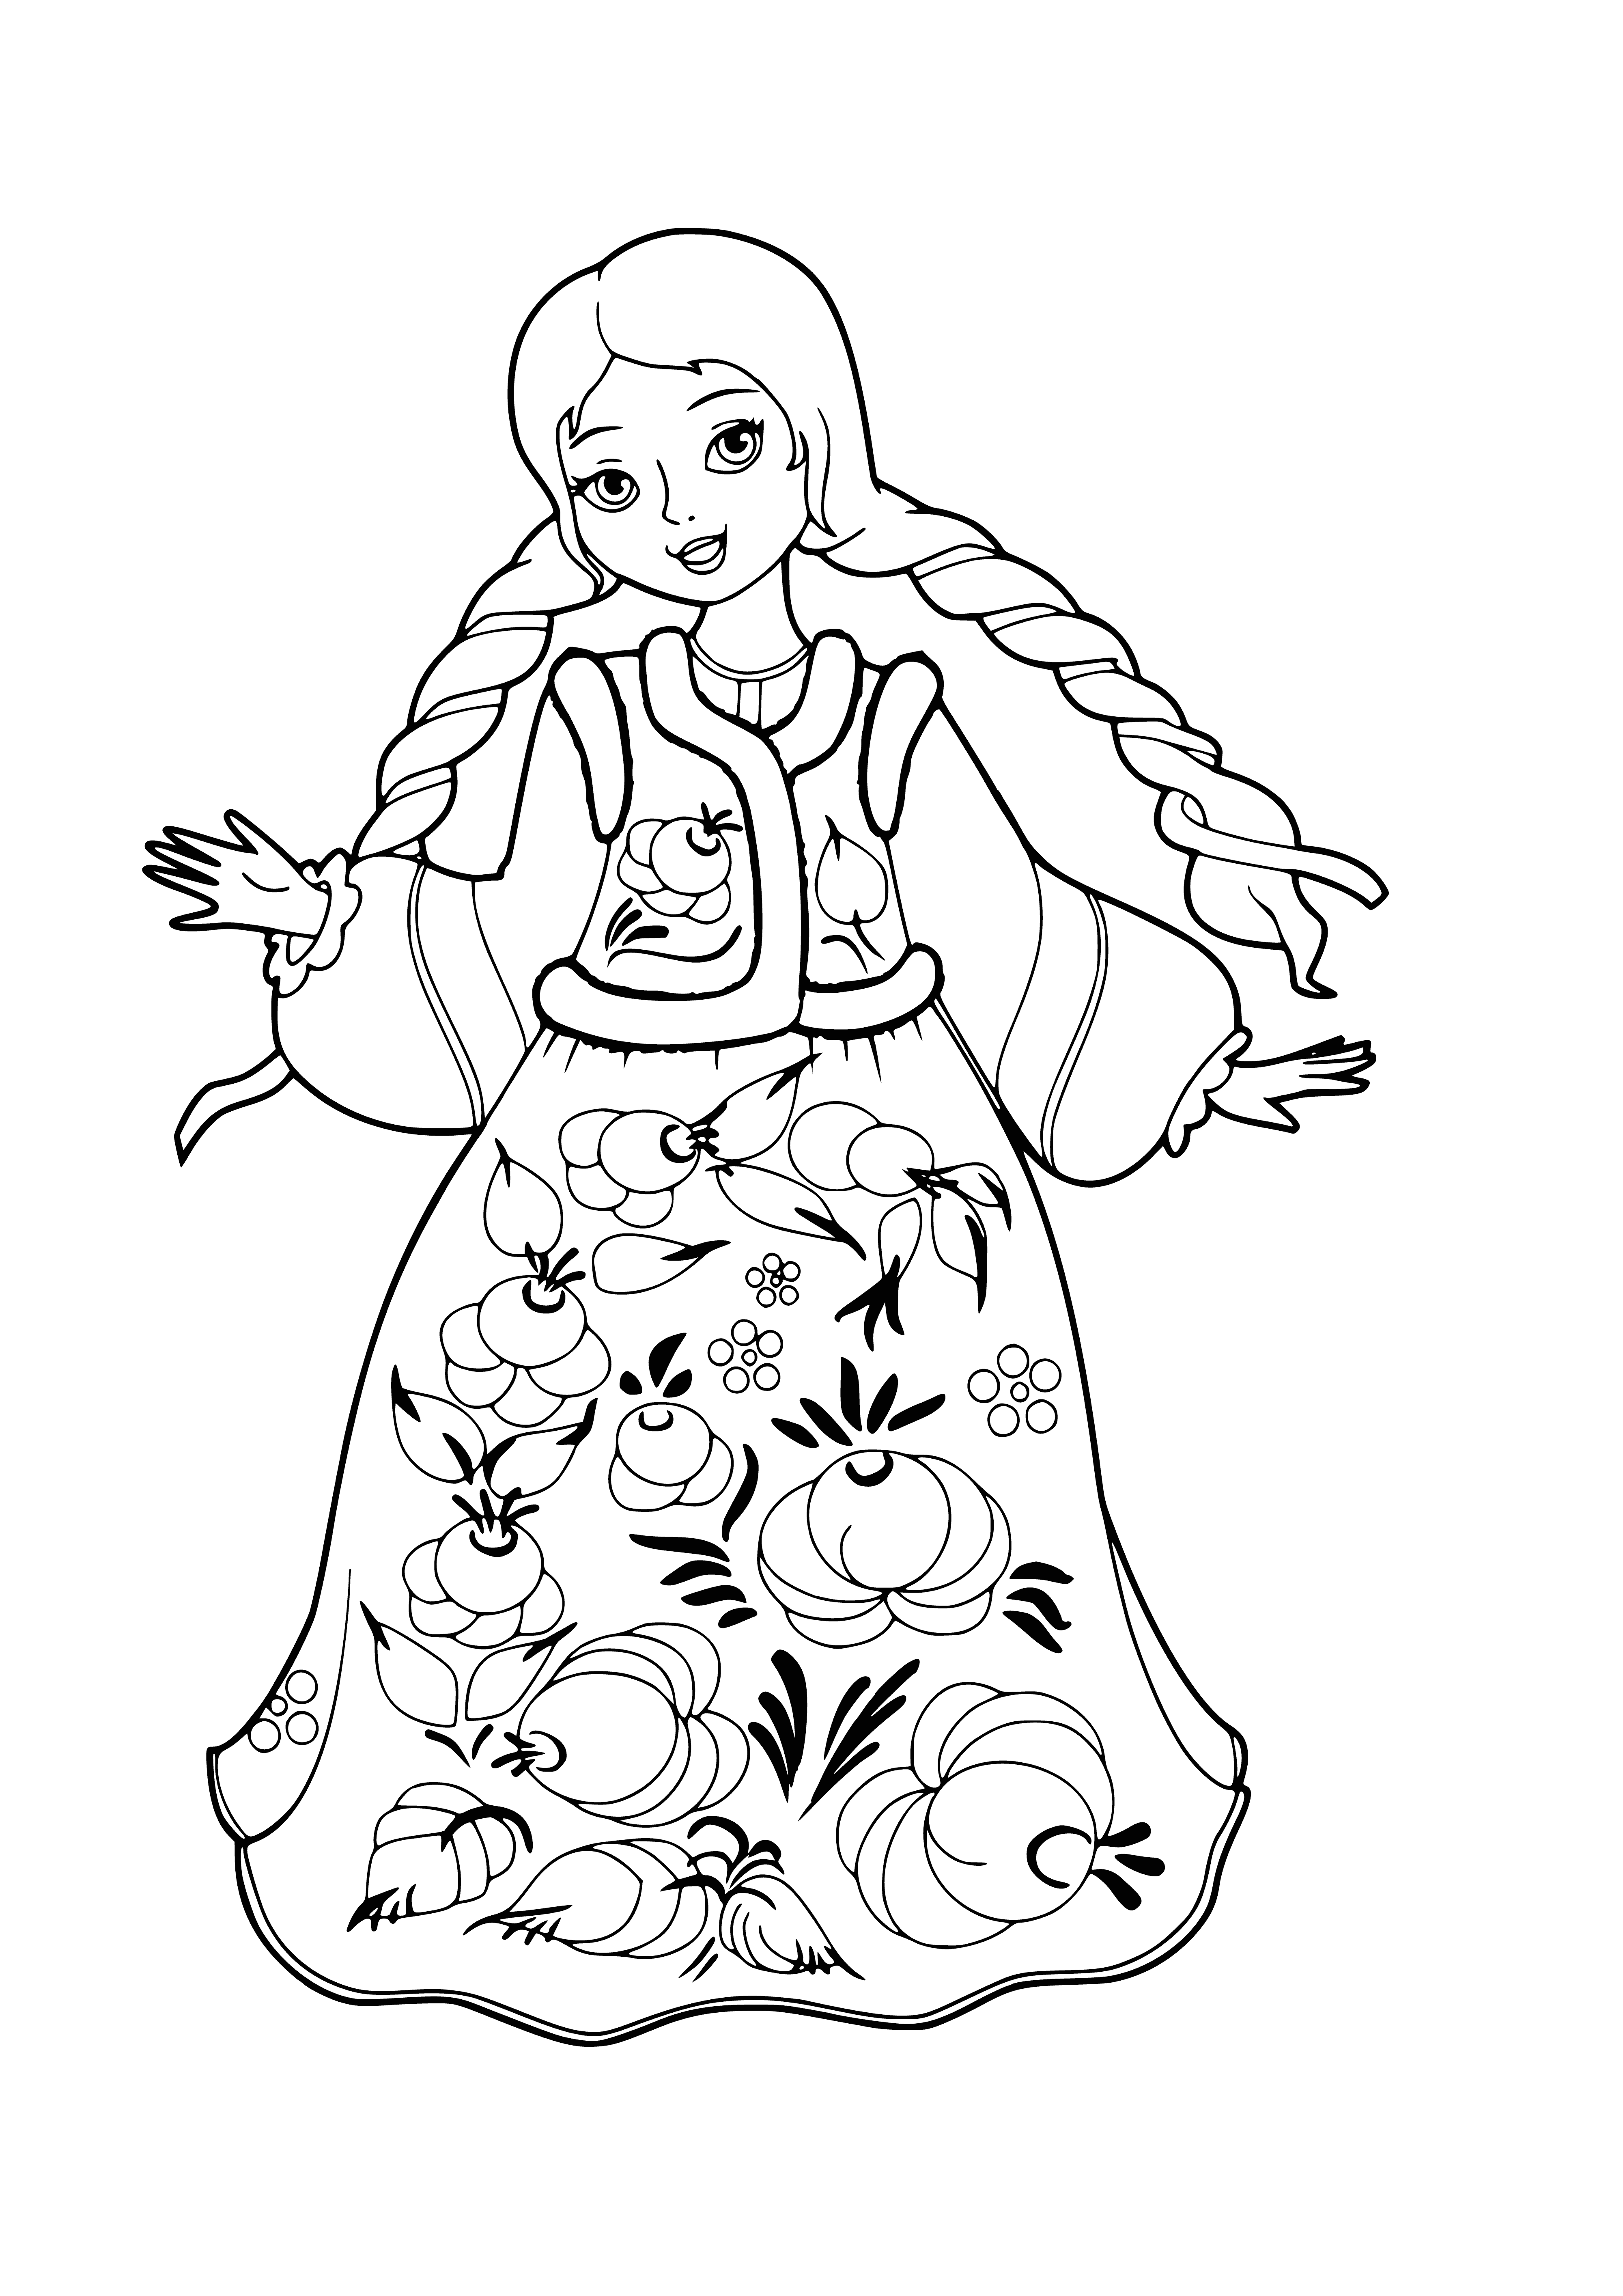 coloring page: Beautiful Russian women renowned for their beauty, style, love of fashion & strong family values. Find your perfect match in these coloring pages.